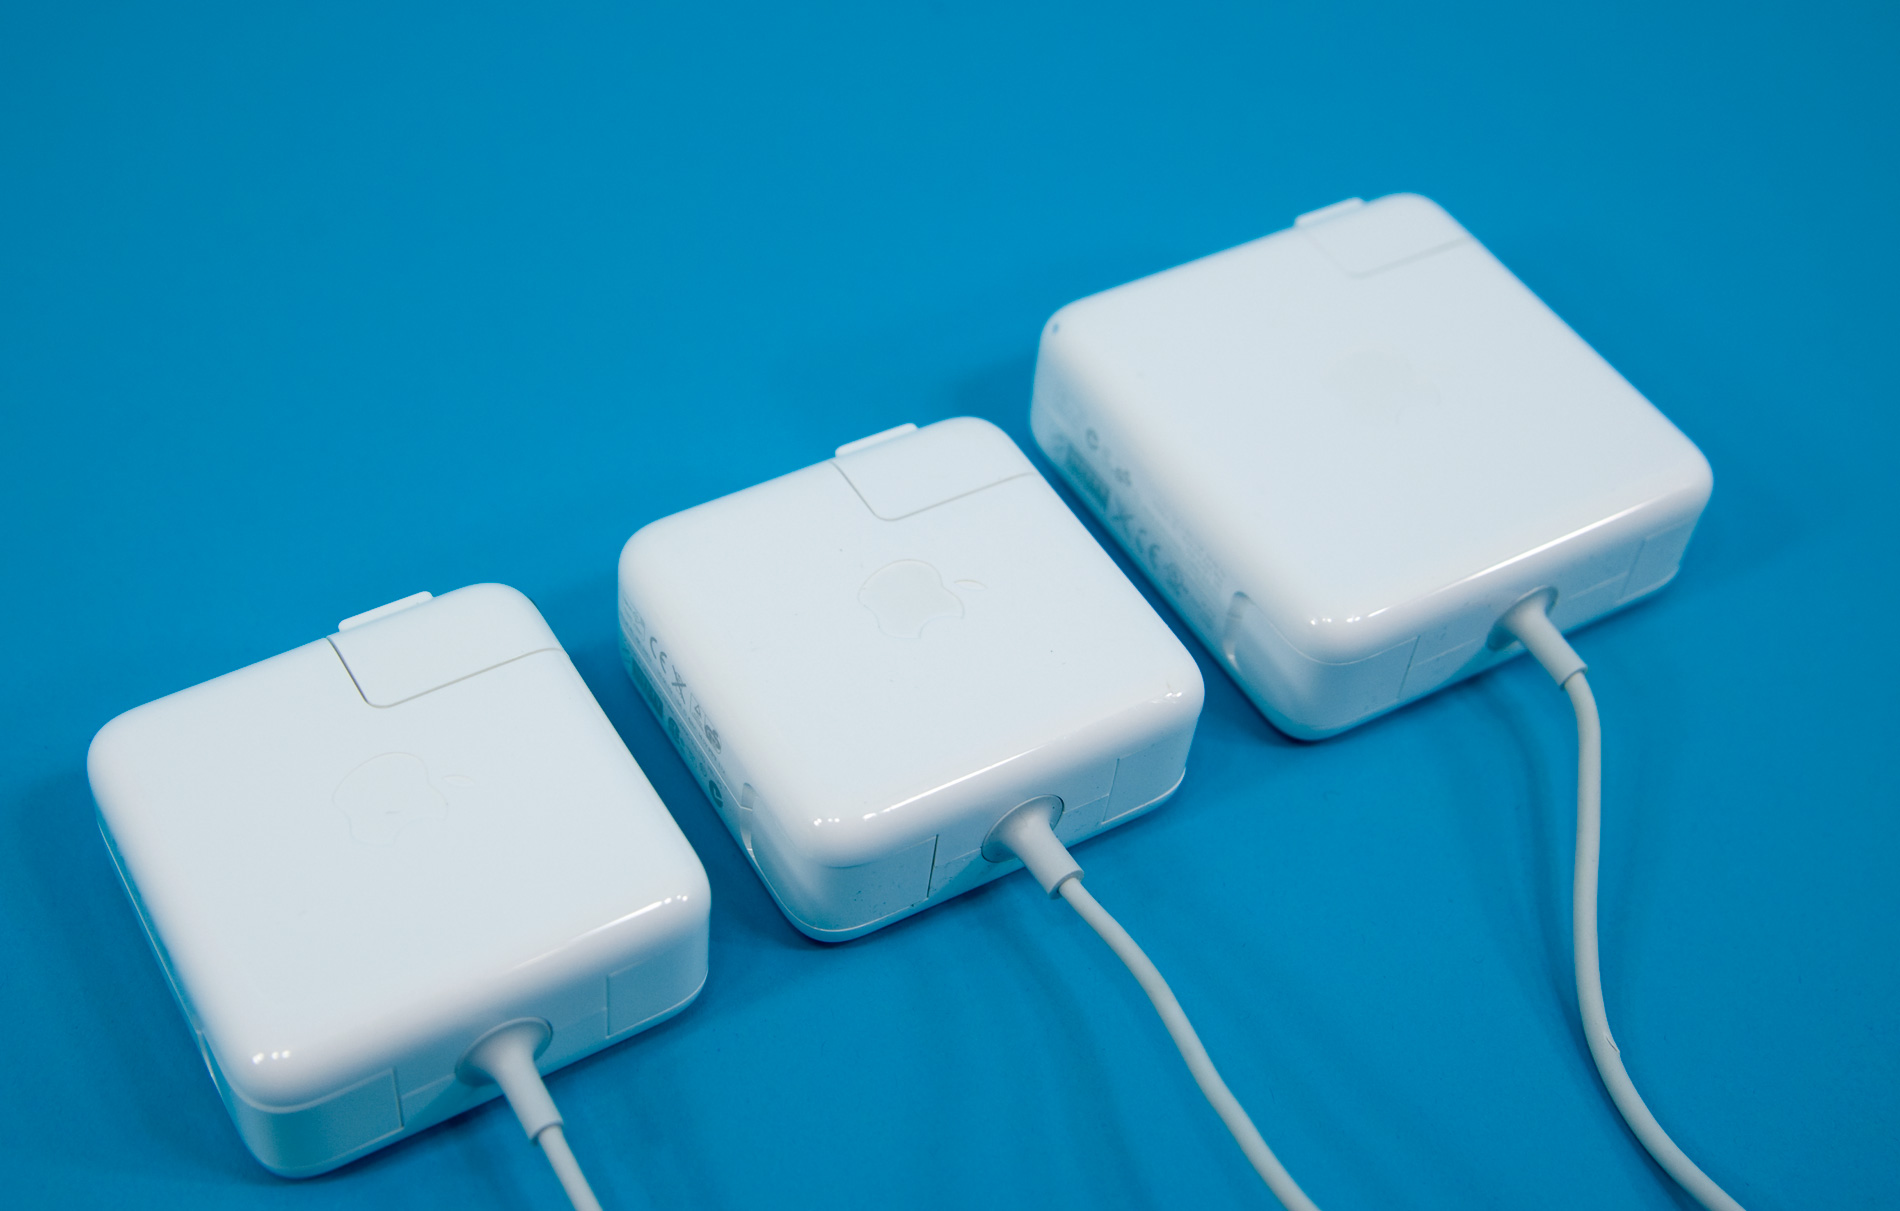 old apple macbook air charger